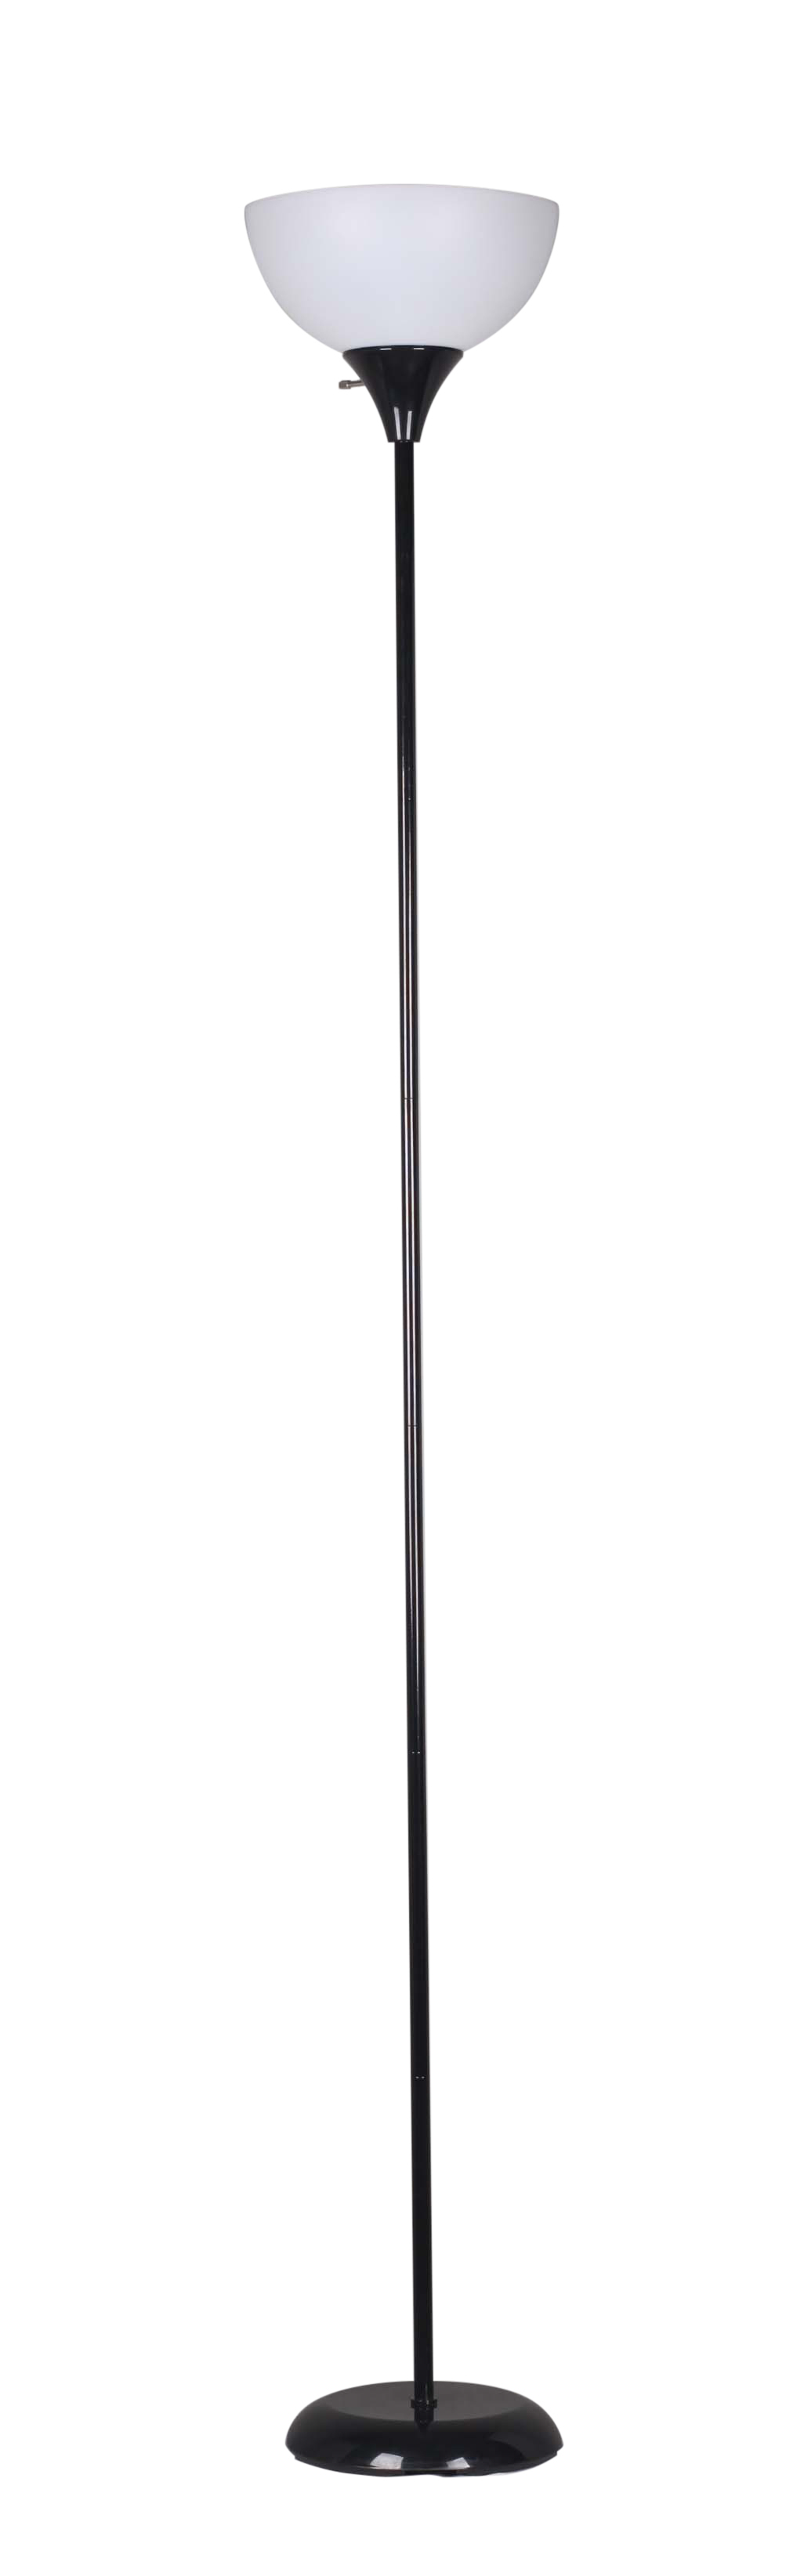 Mainstays 71" Floor Lamp, Black, Plastic, Modern, Perfect for Home and Office Use - image 1 of 9